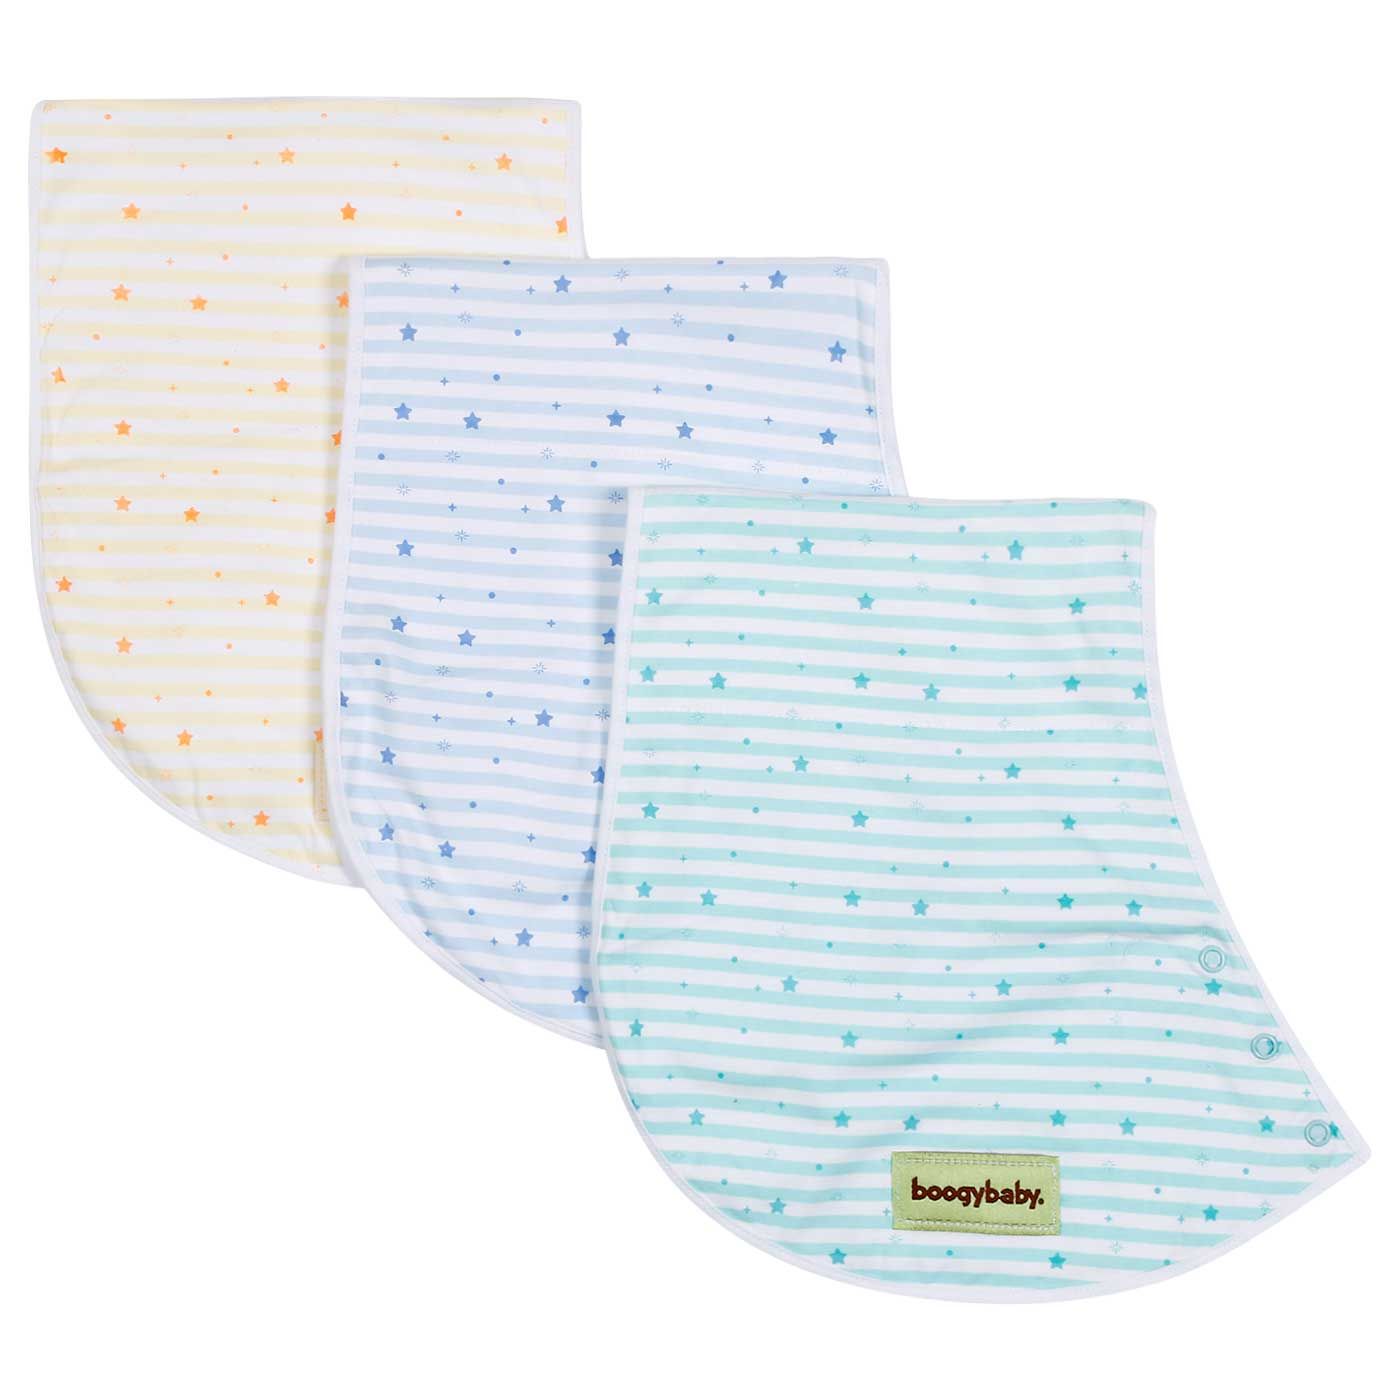 Boogybaby Pipi Burping Cloth - Stardust (Isi 3) - 1